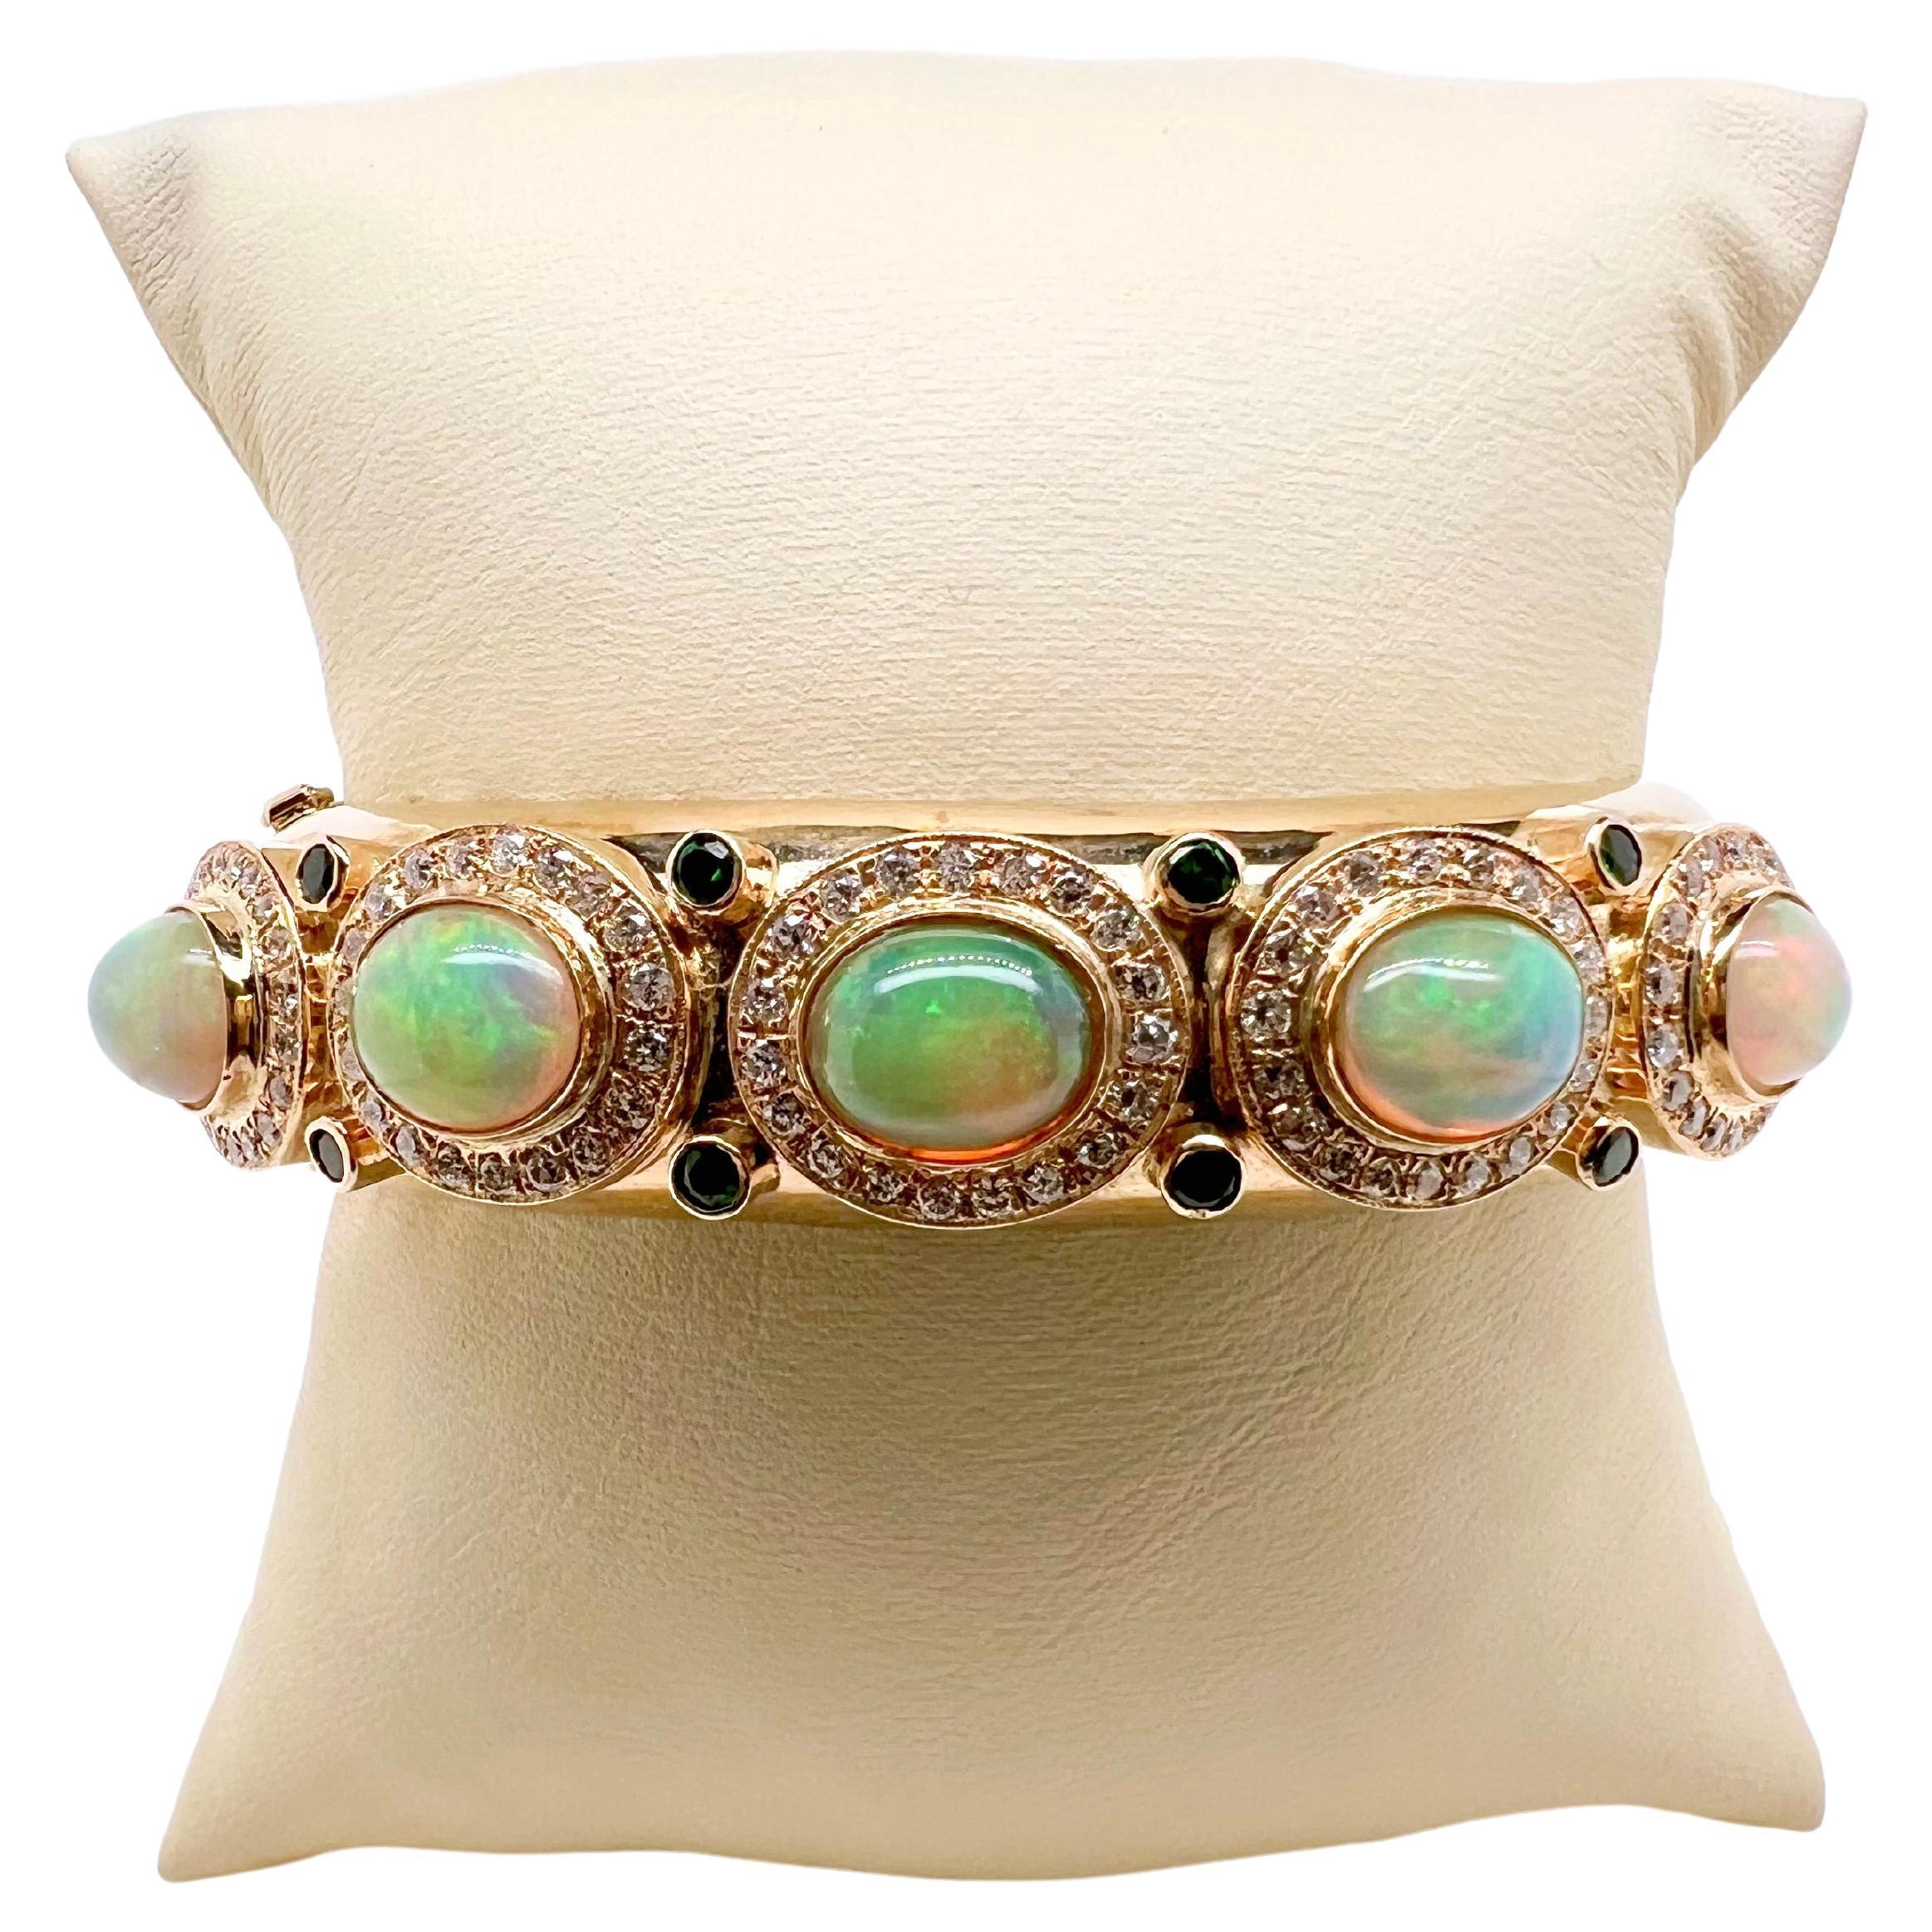 This stunning bangle is handmade with meticulous details.  TheEthiopian opals are bezel set with round brilliant diamonds and stunning Tsavorite green garnets surrounding it.  The vibrant opal stands out agains the yellow gold and the bangle has an